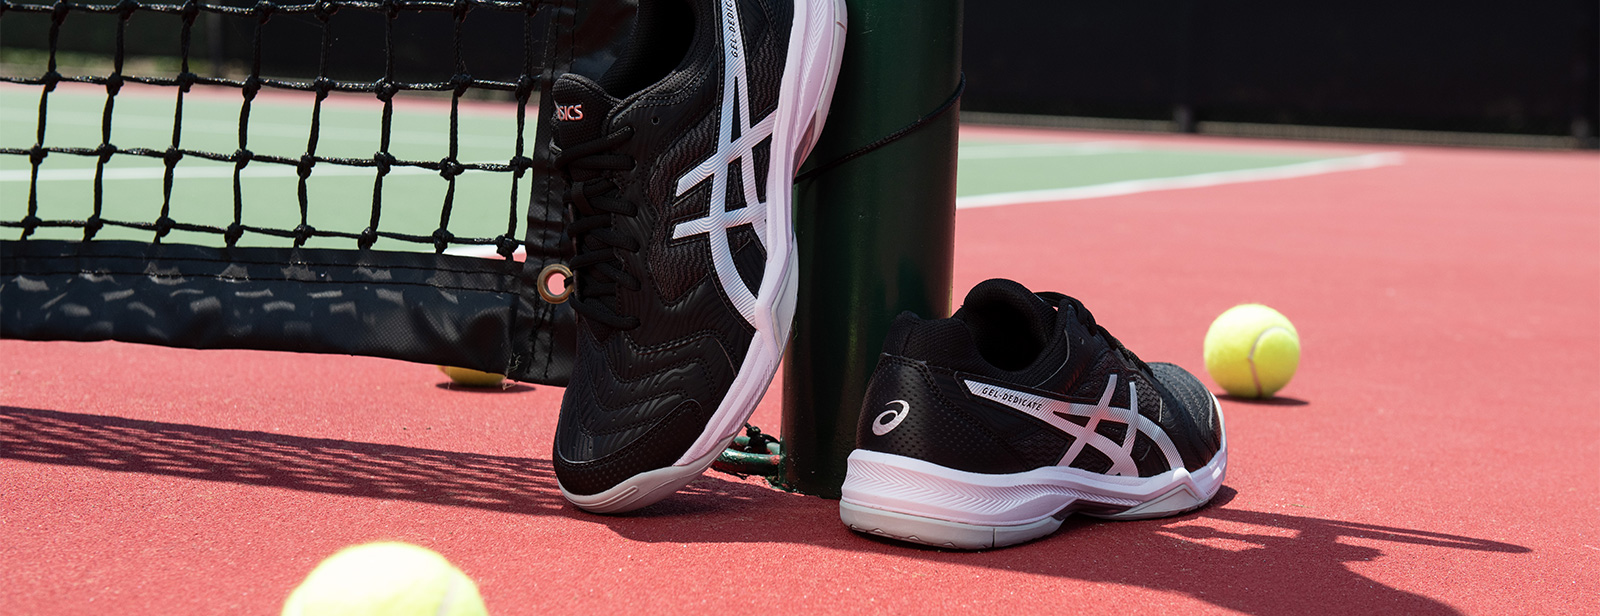 Tennis Shoes to Wear on Grass, Clay, and Hard Courts